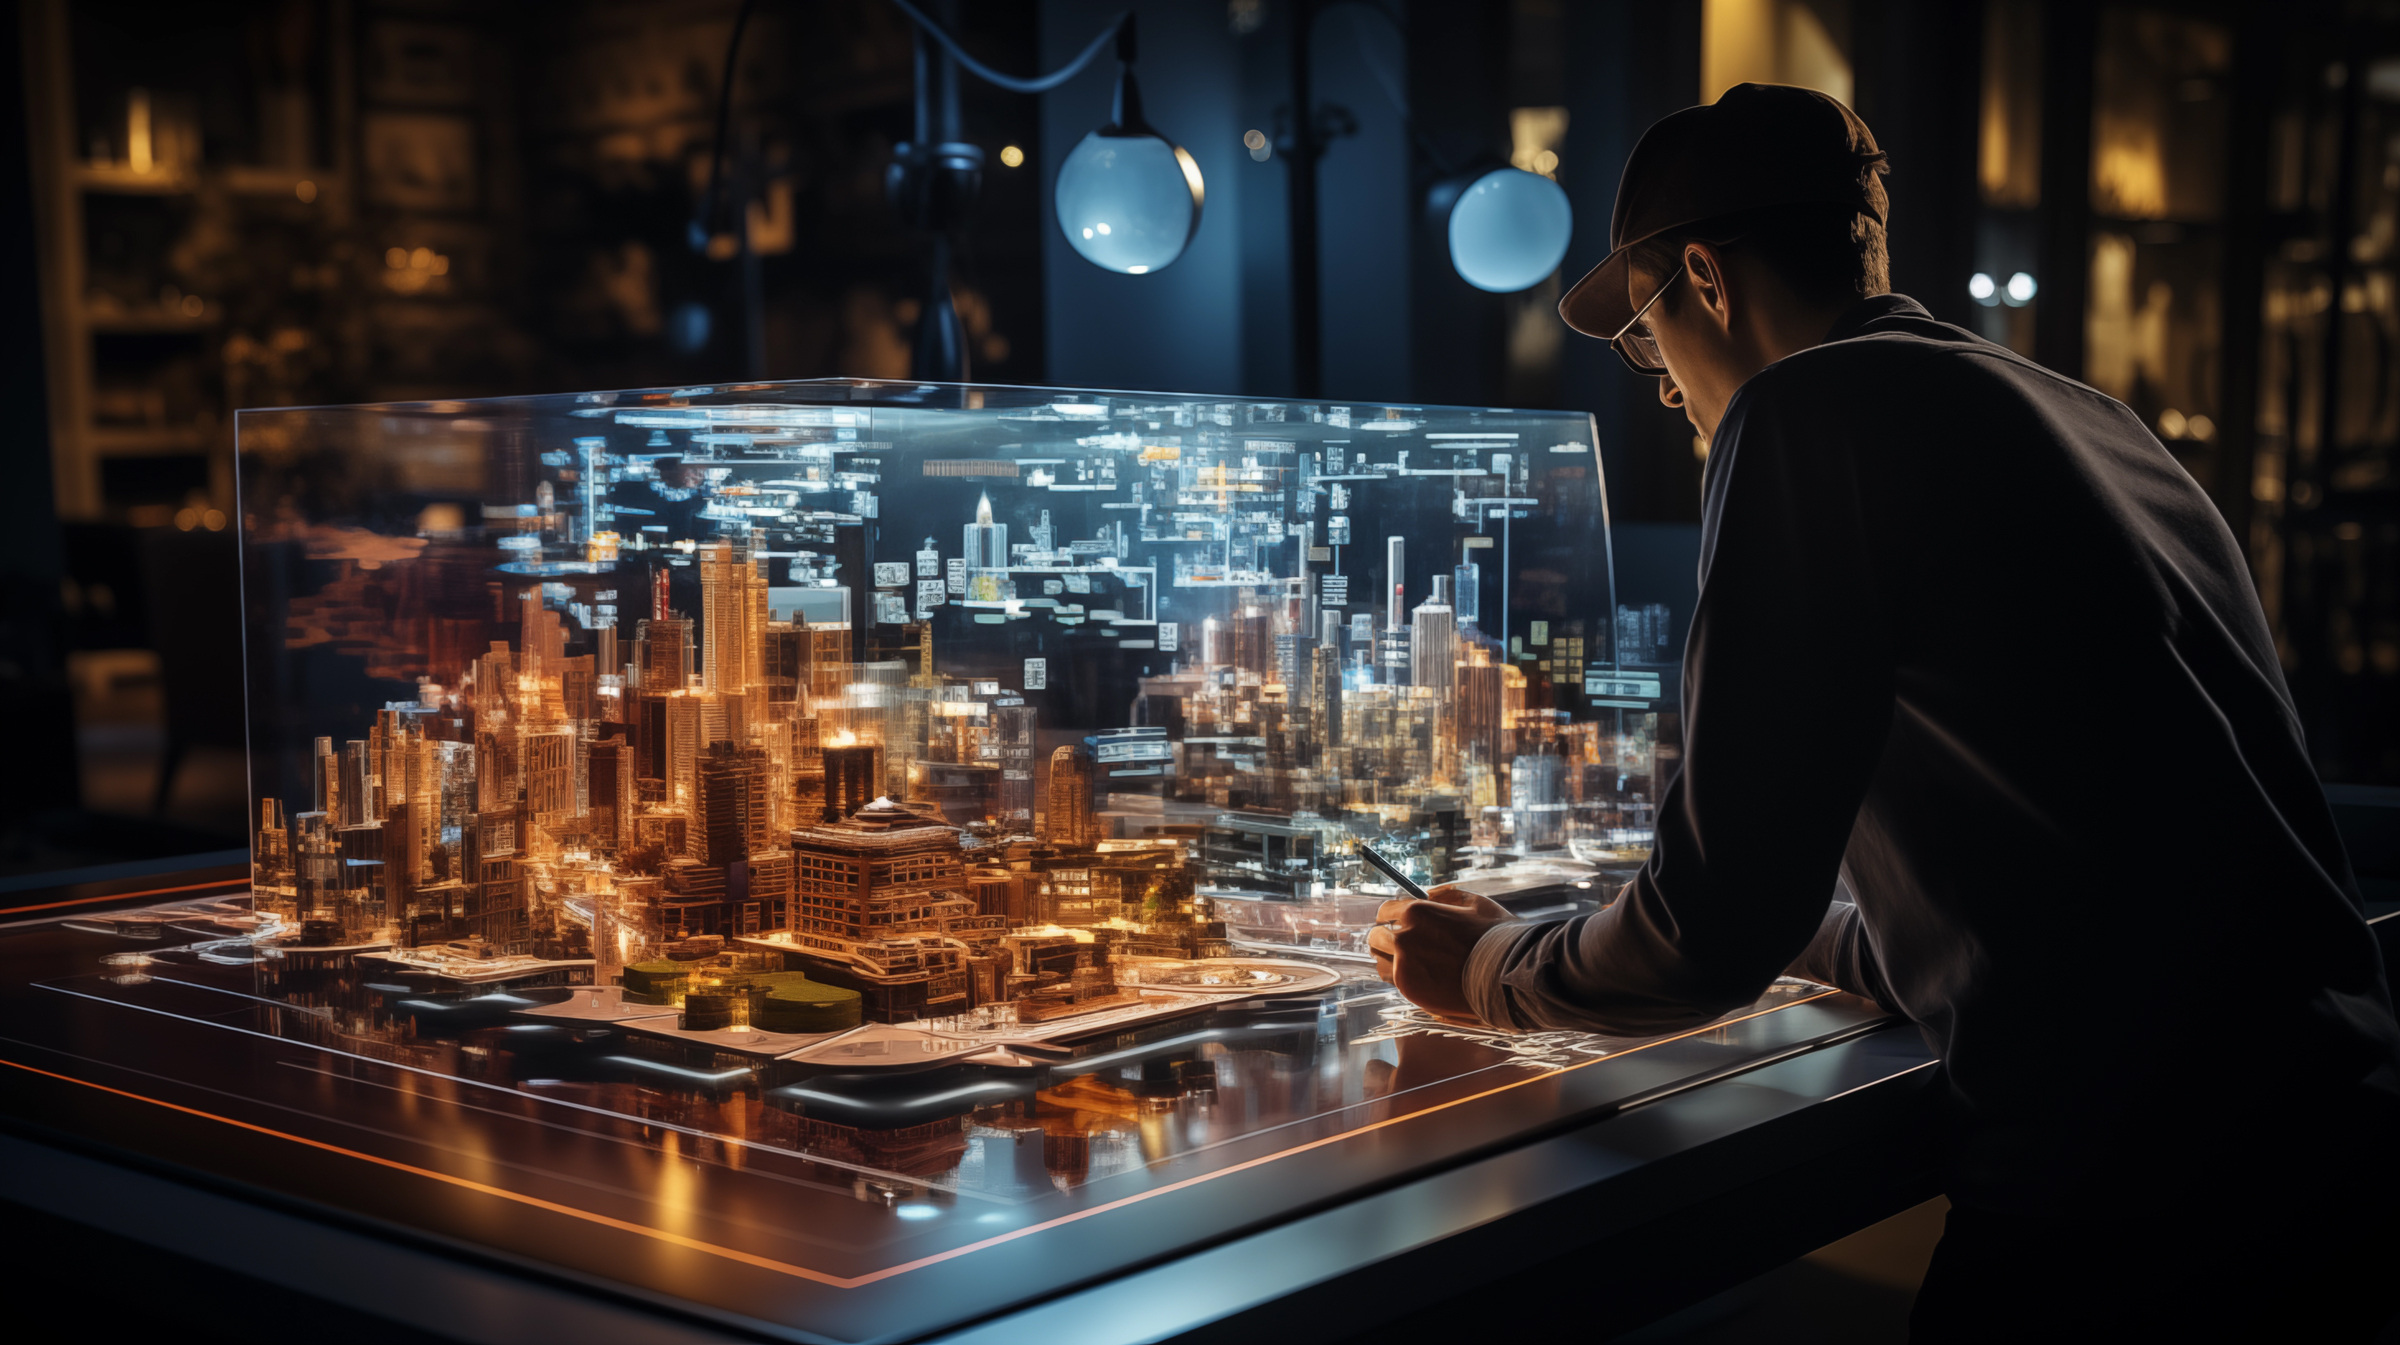 An architect interacts with a holographic AI interface displaying a futuristic city model on a digital table.